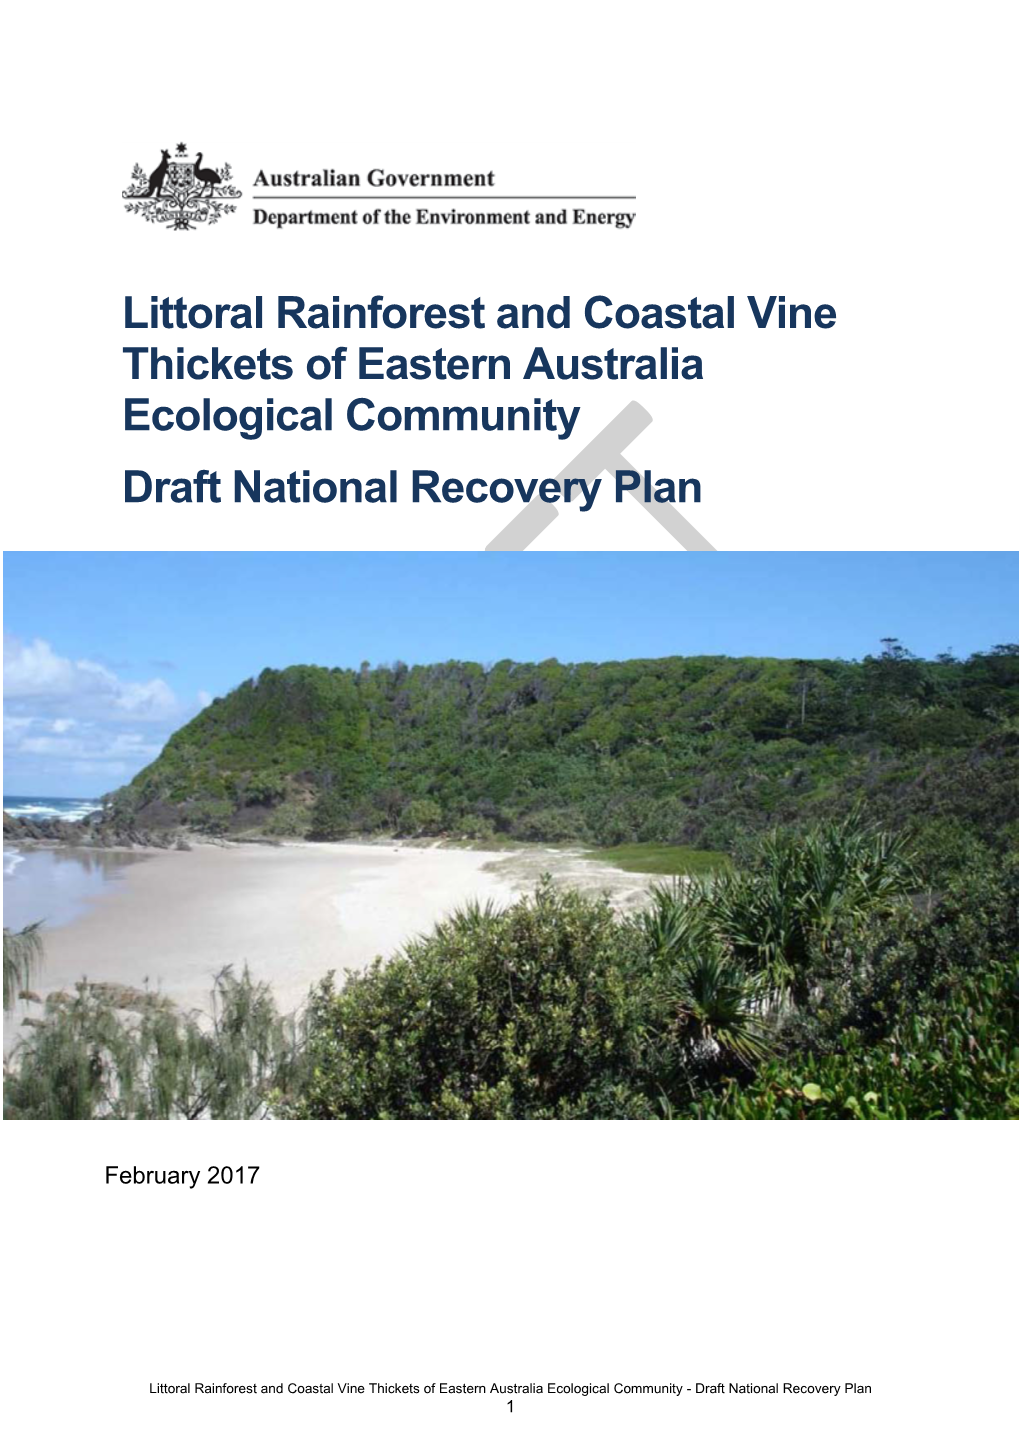 Draft National Recovery Plan for the Littoral Rainforest and Coastal Vine